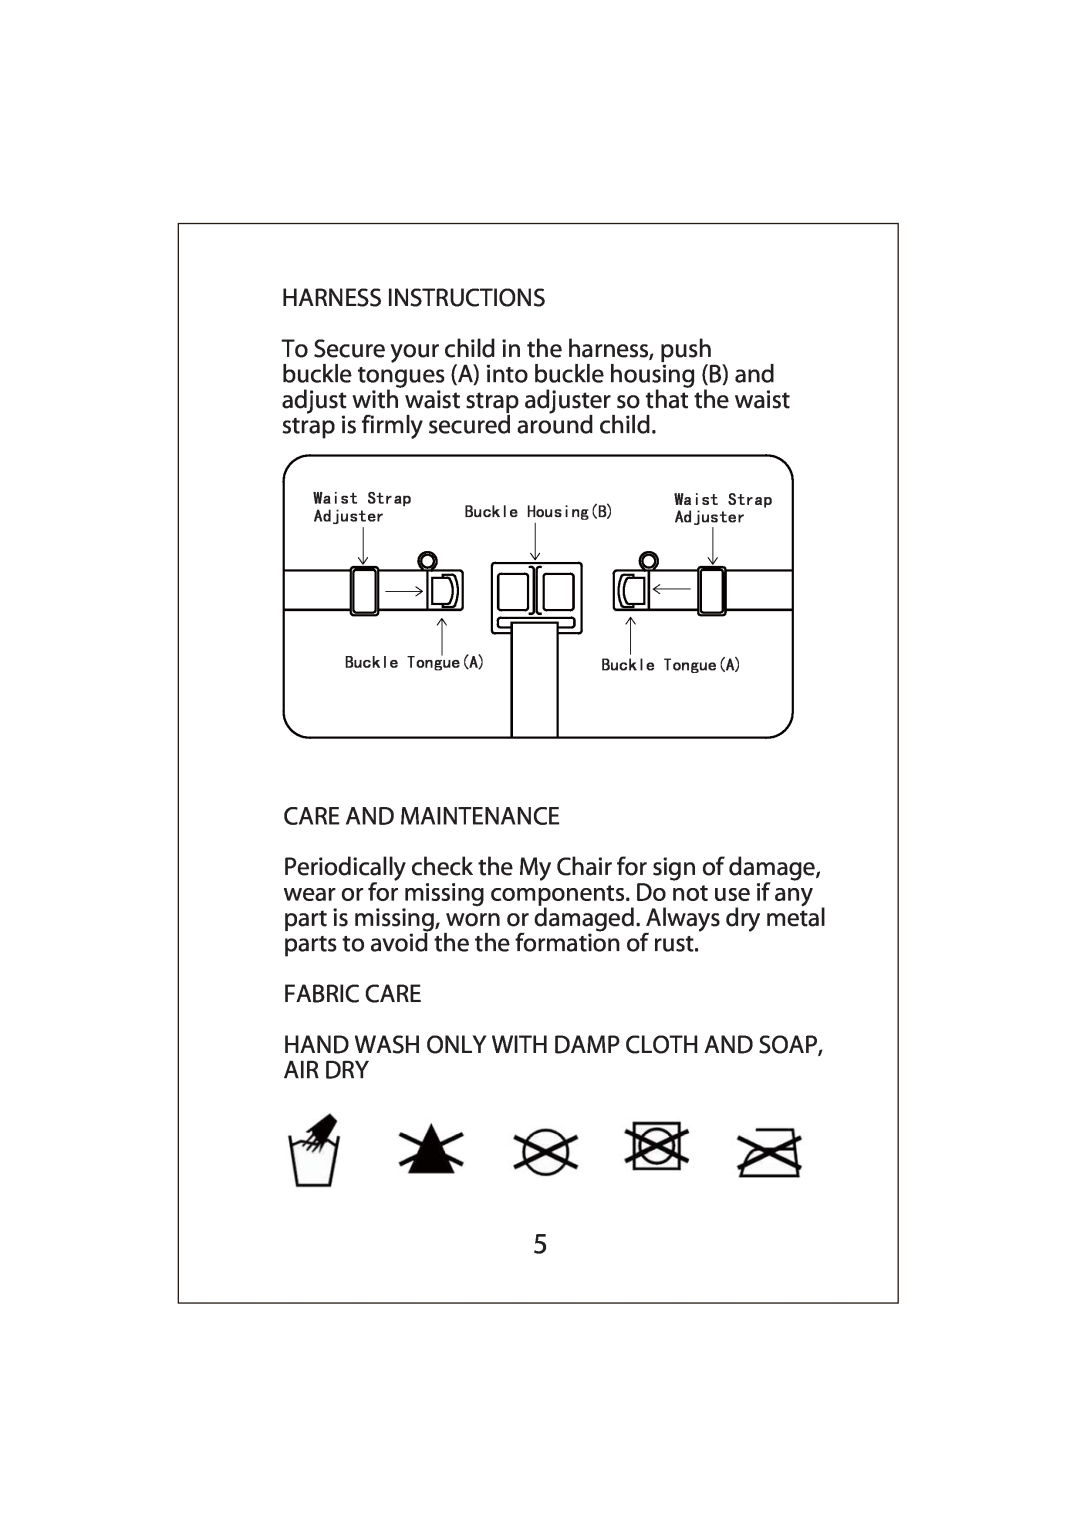 Regalo 3510 owner manual Harness Instructions 